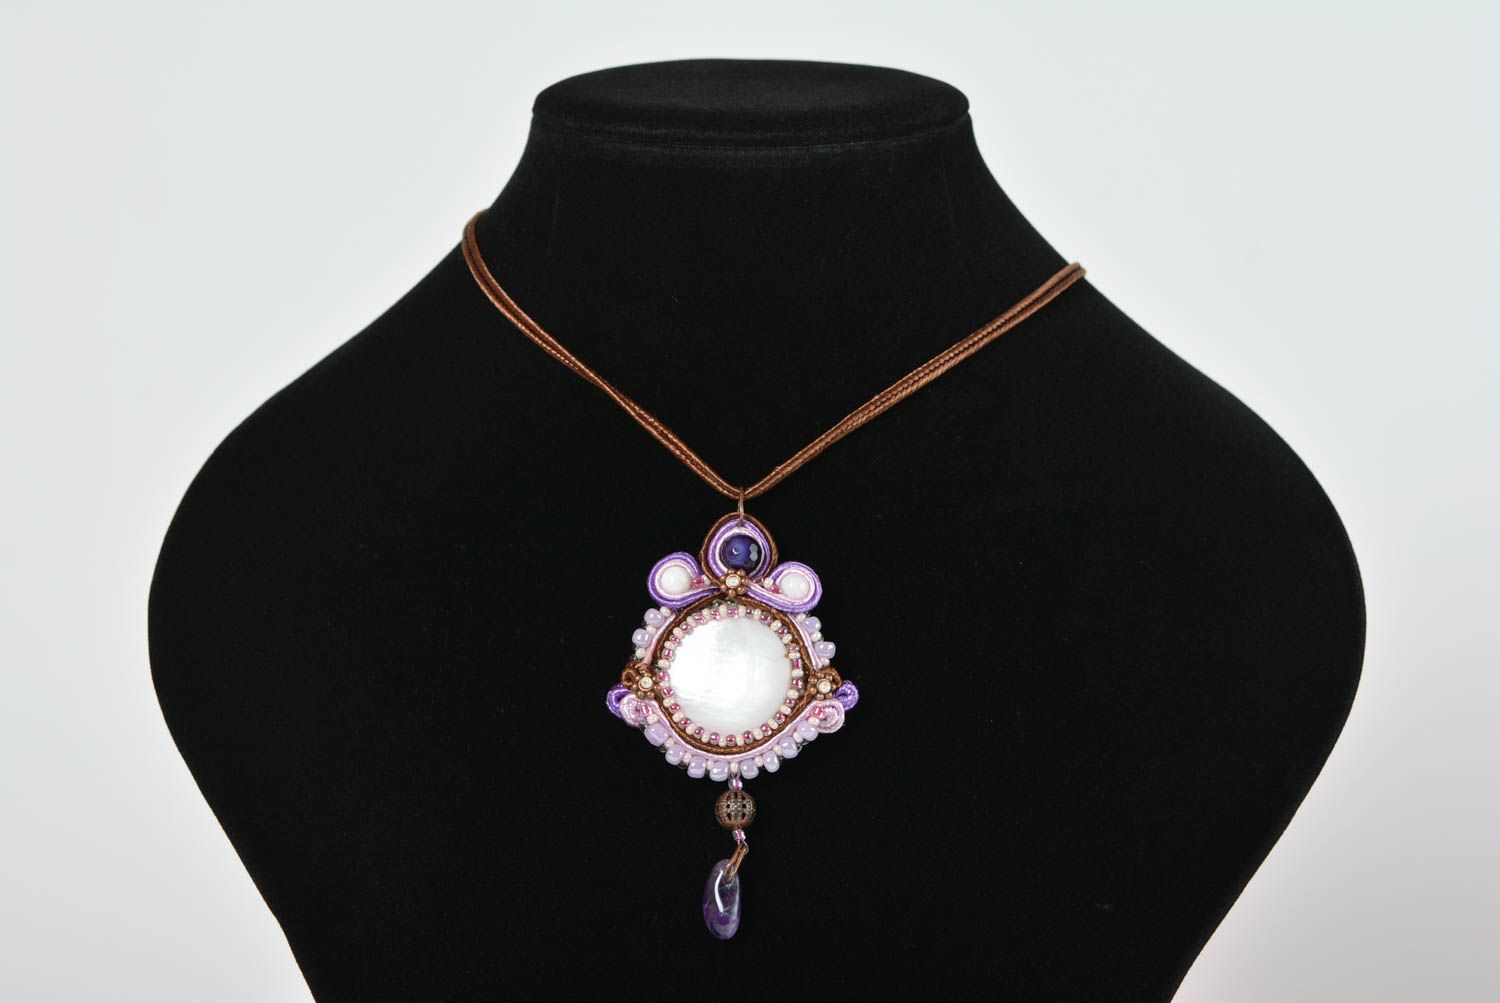 Handmade pendant soutache necklace evening accessories with natural stones photo 1